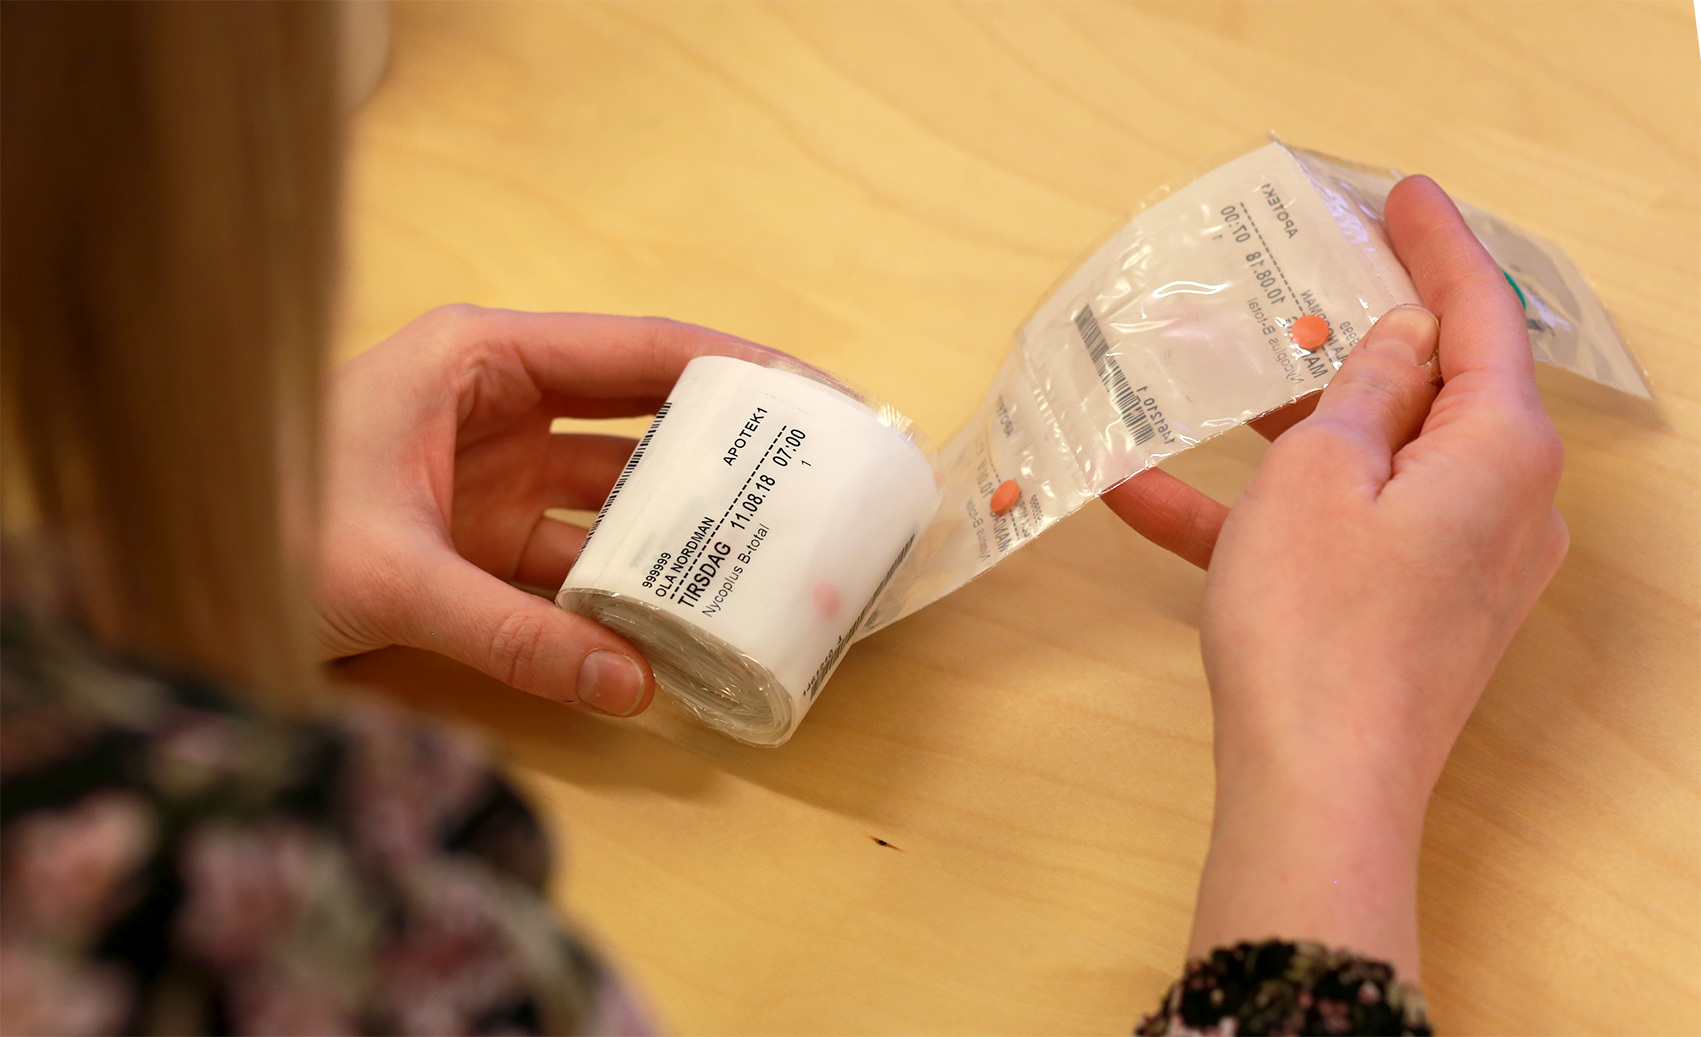 Multidose are machine-packed rolls with medicine doses. Each bag is marked with the date and time when the medicine is to be taken. (Photo: Hasse Berntsen)